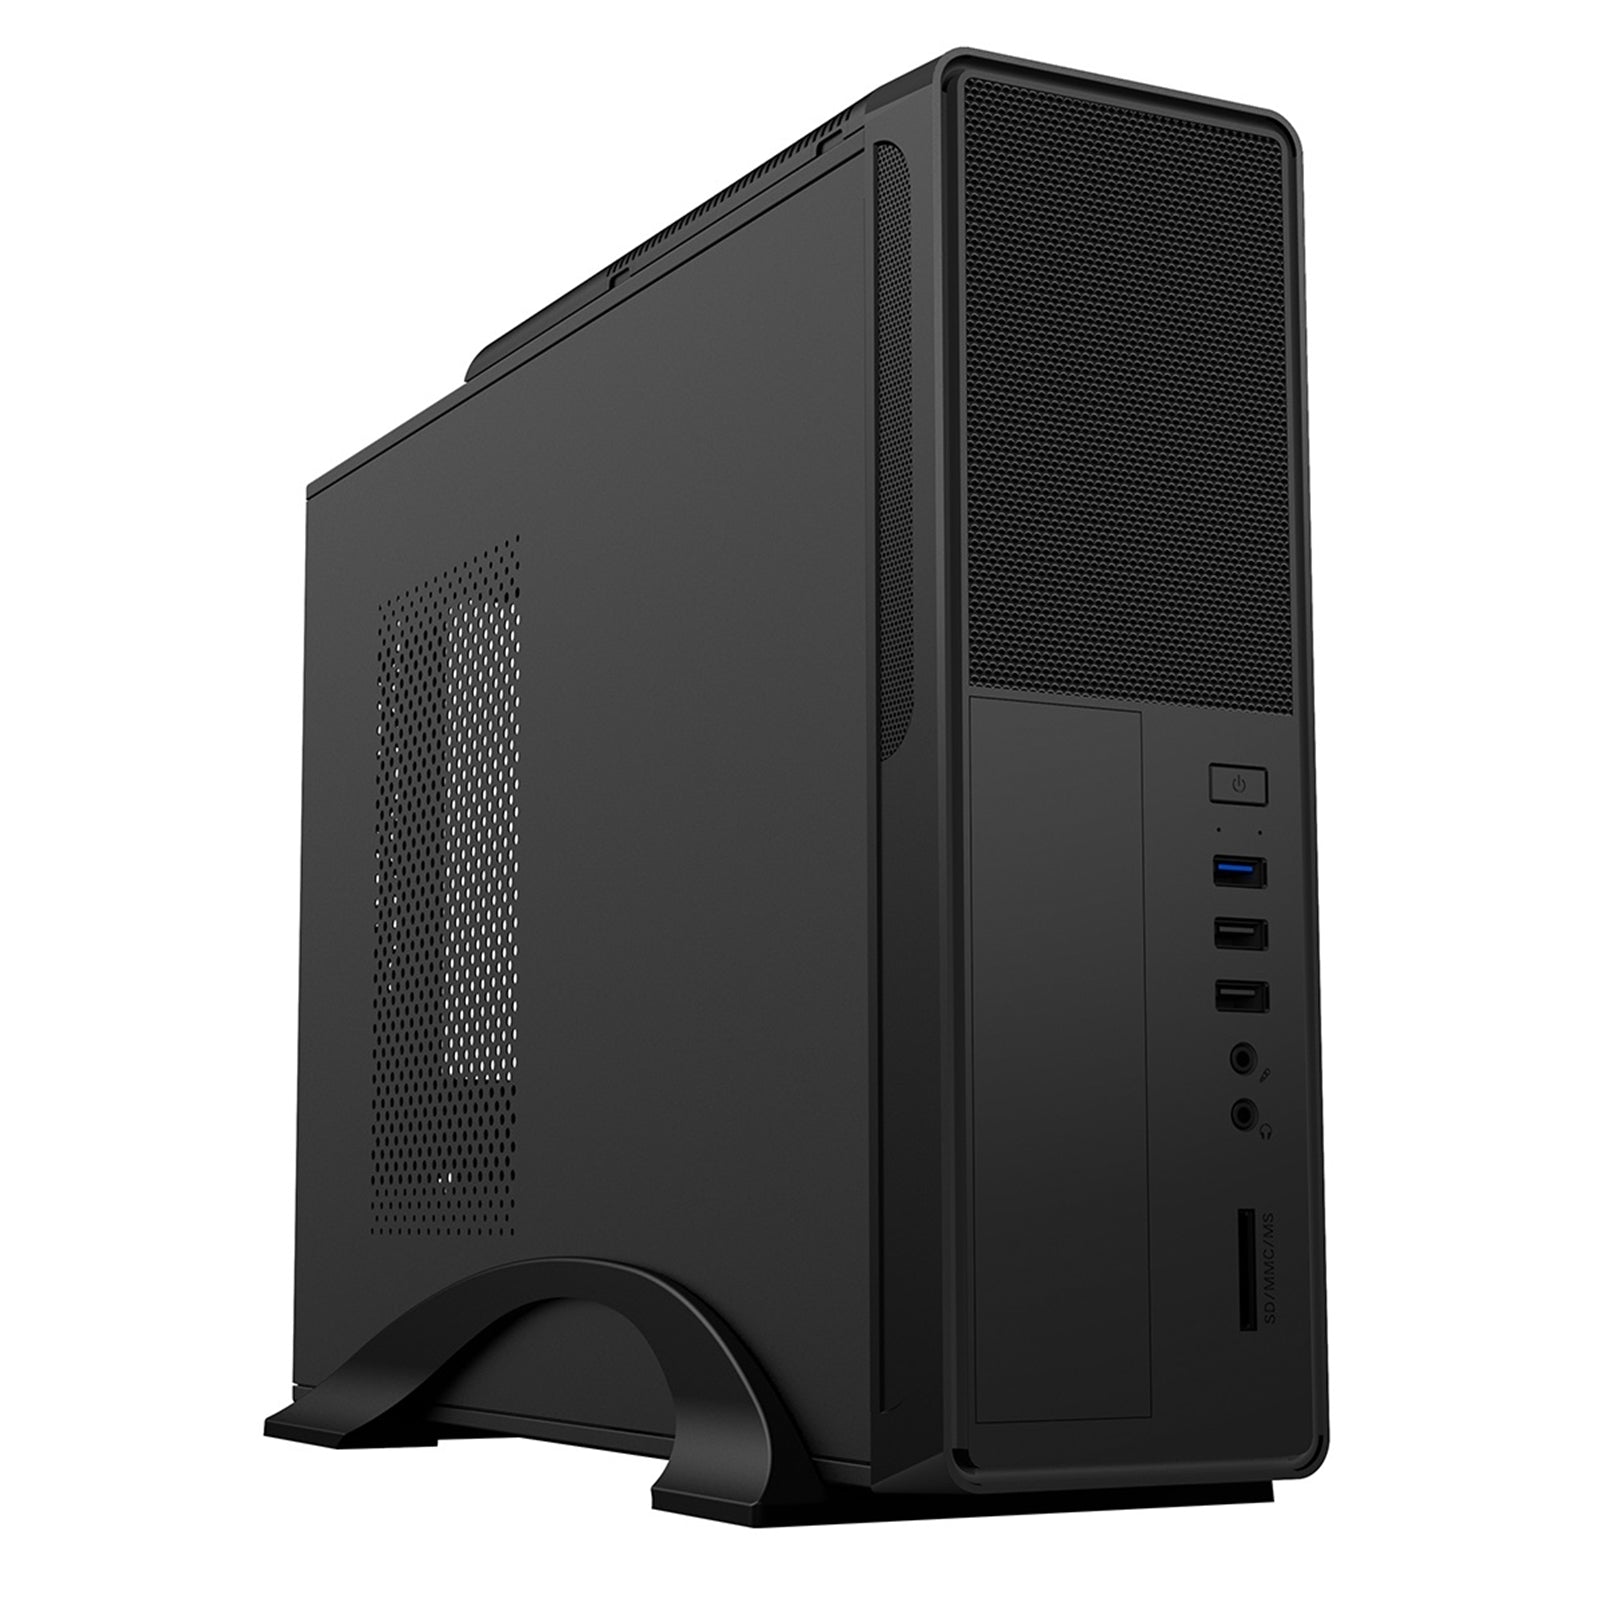 CiT S014B Compact Micro ATX Case with Efficient Cooling and 300W PSU